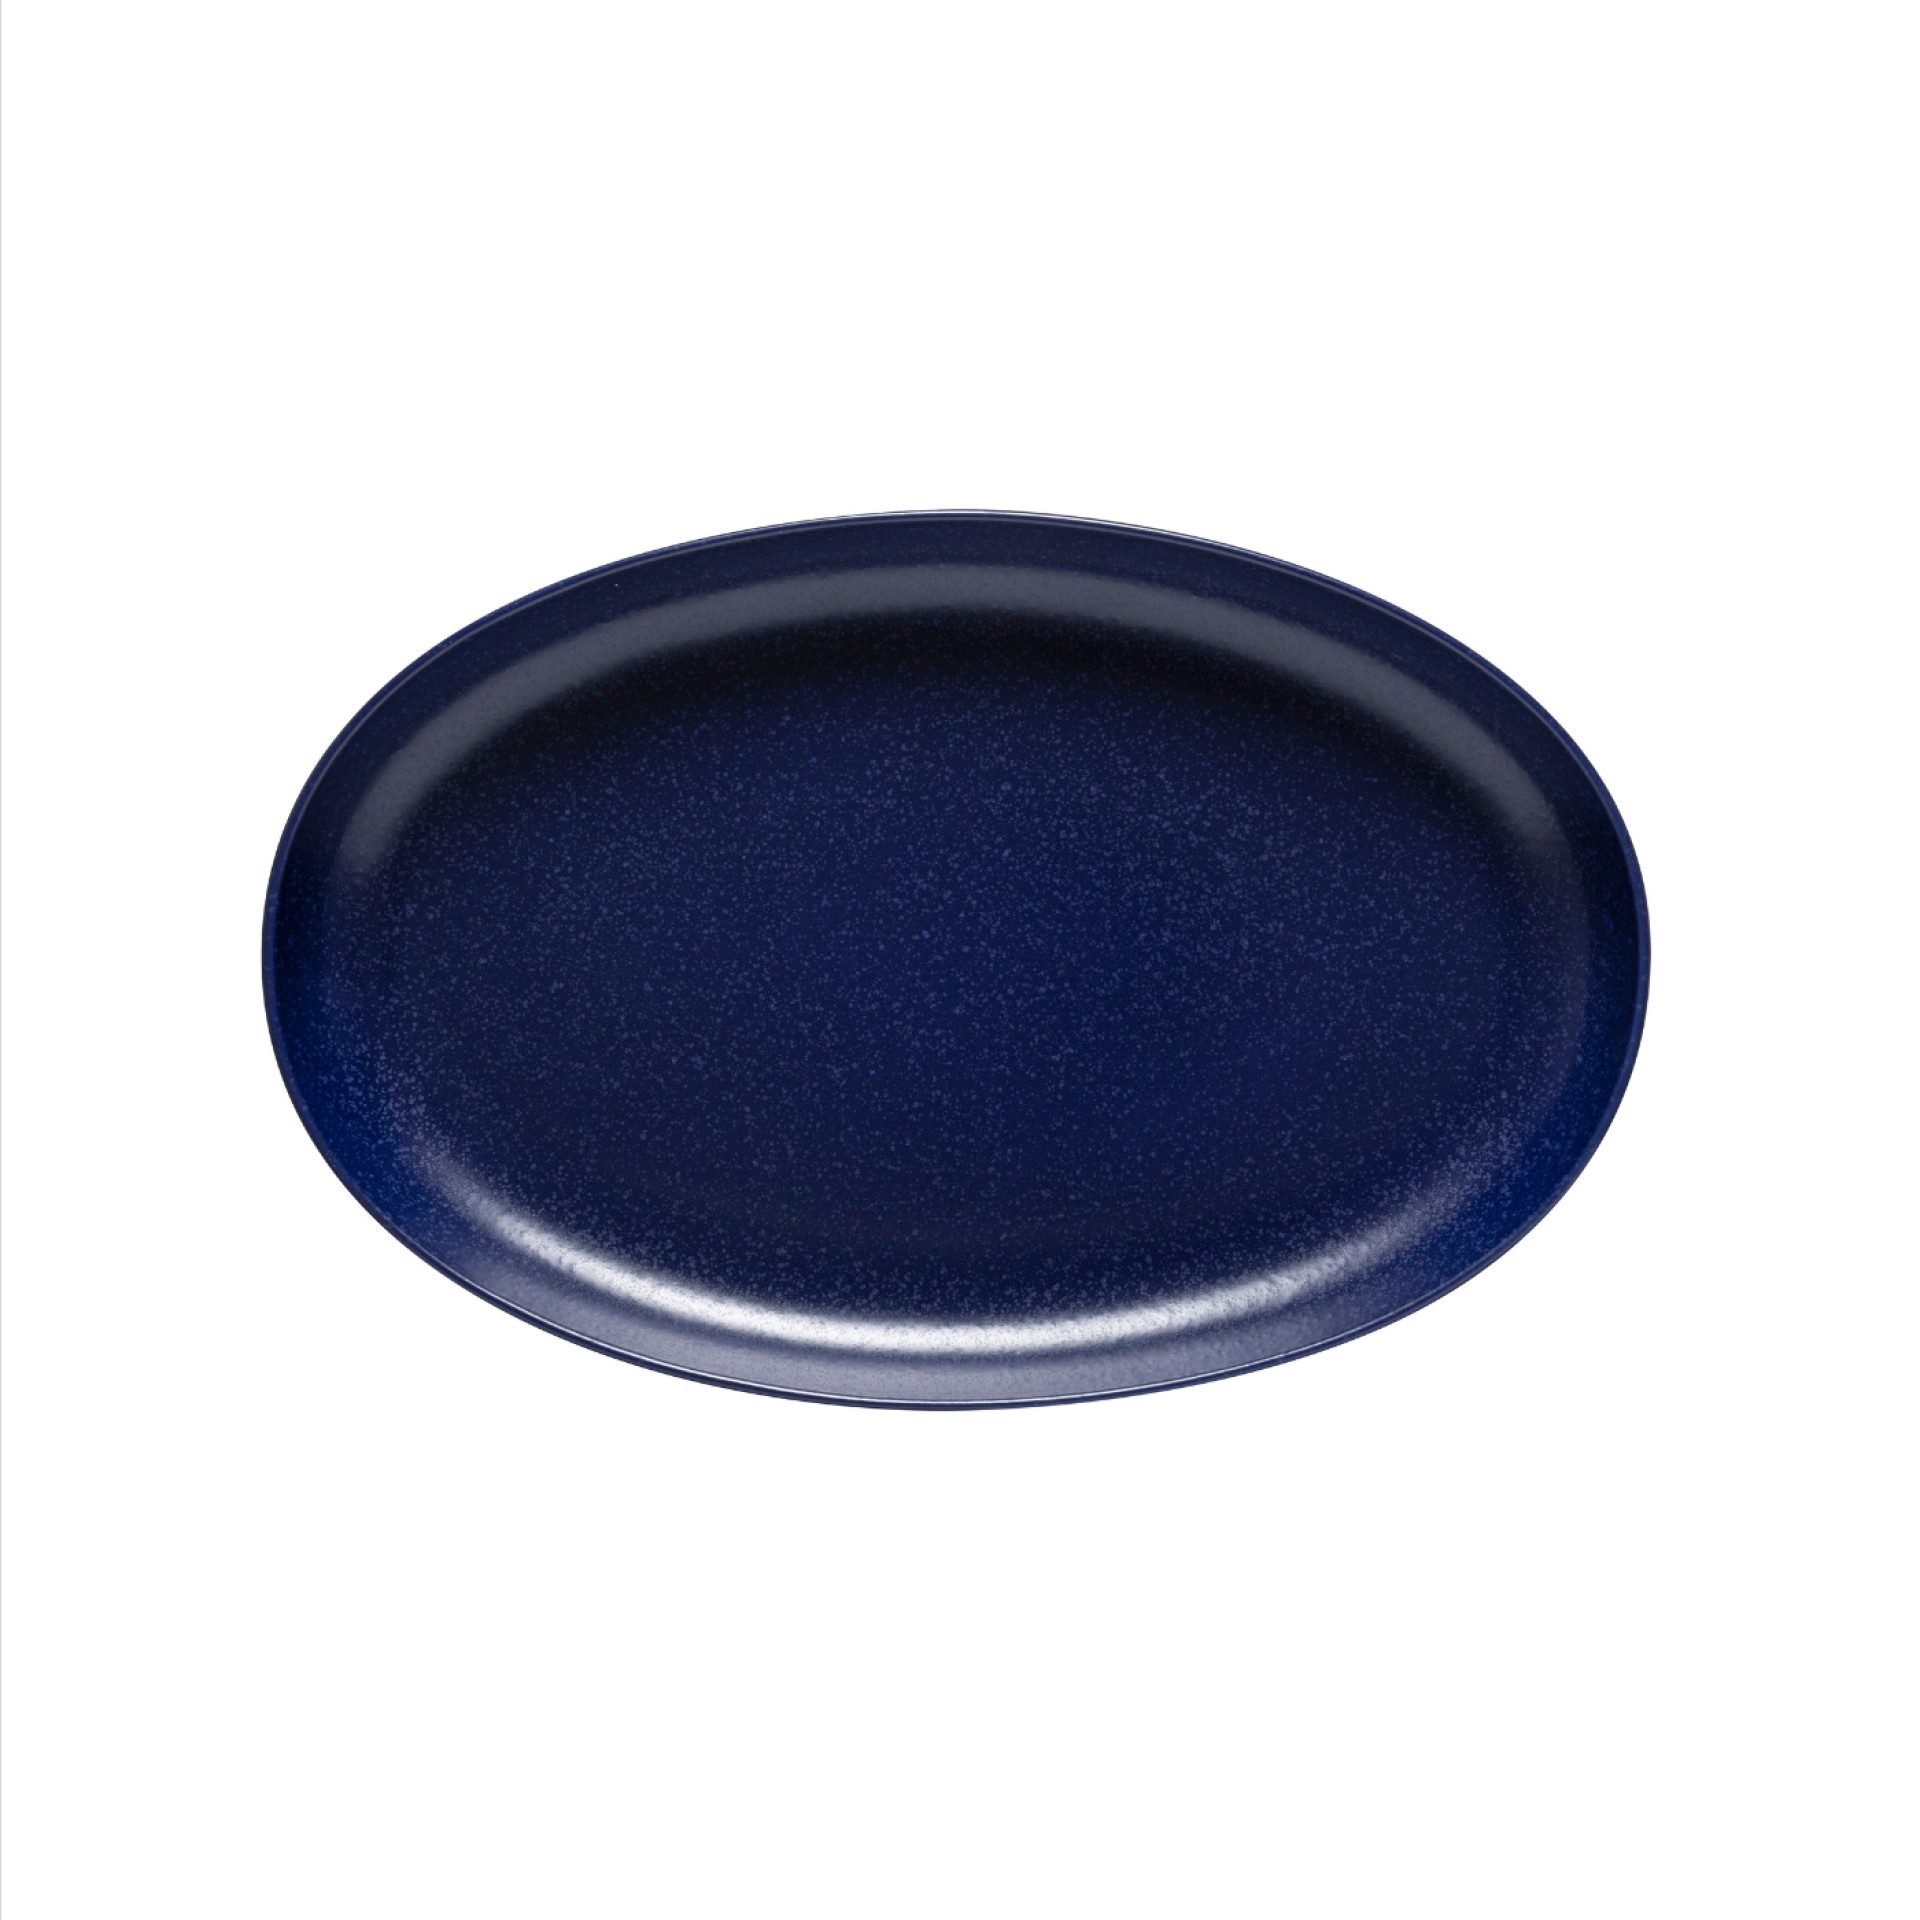 Oval Platter Pacifica by Casafina